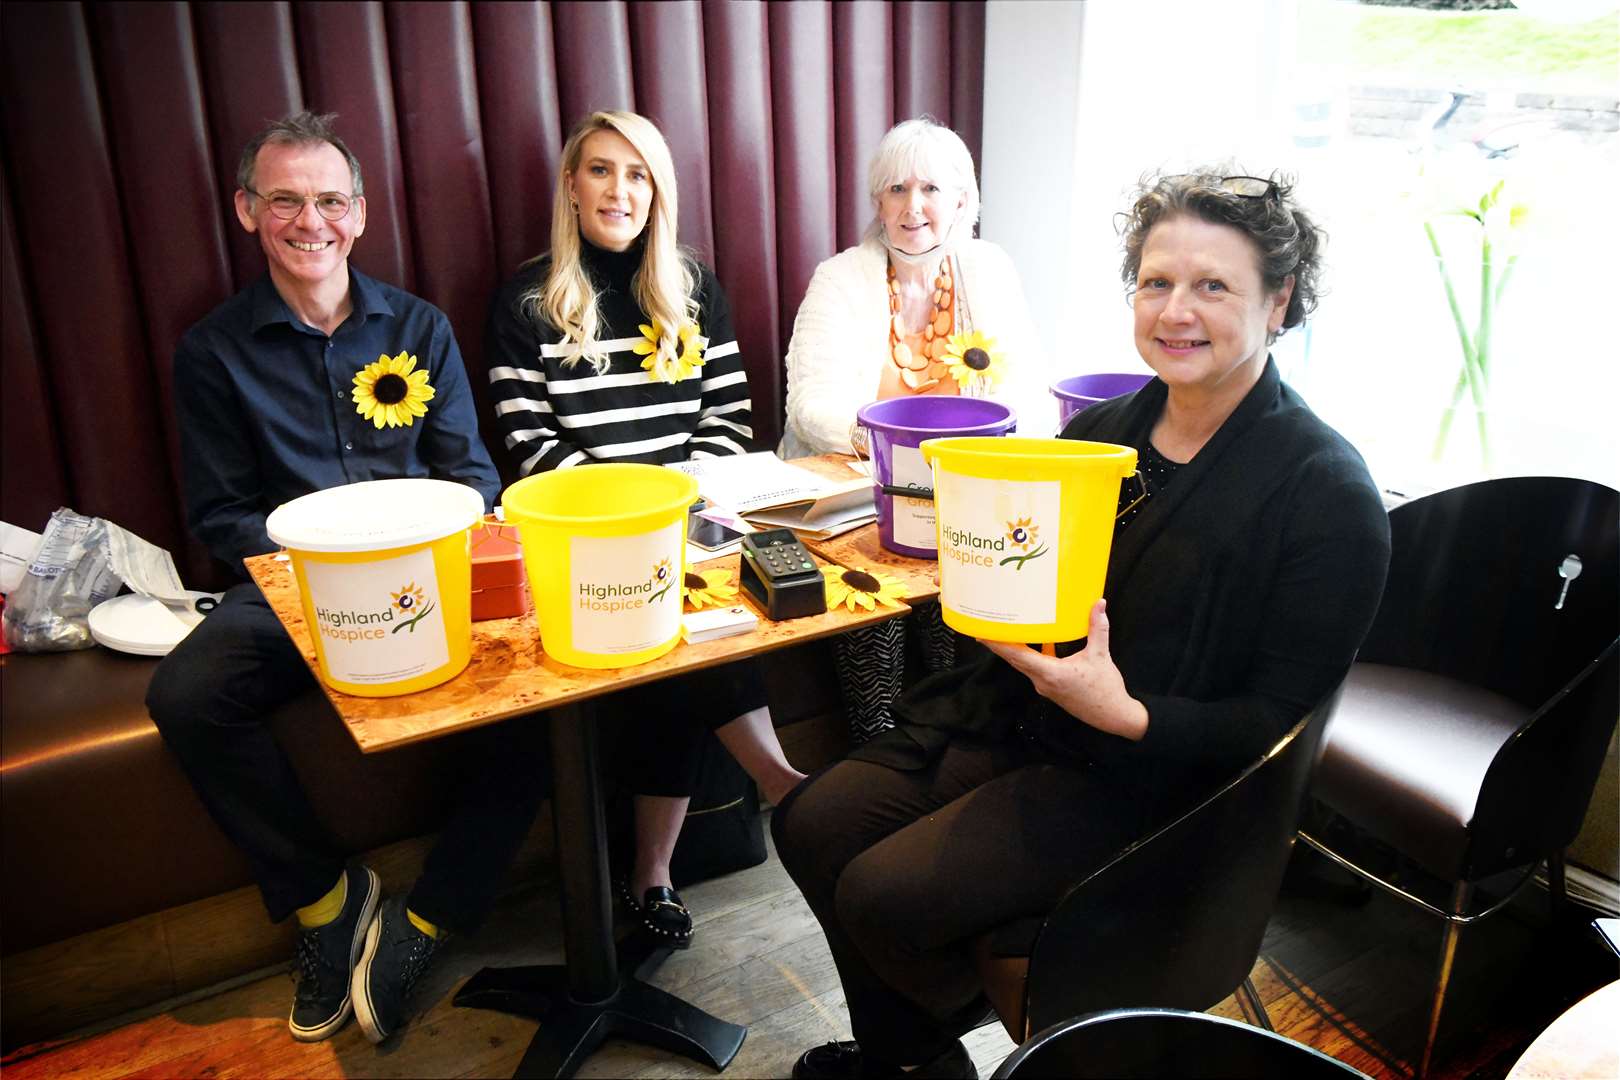 The Hospice team: Andrew Leaver, Fundraising Manager, Karen Duff, Corporate Fundraiser, Sheila Watson, Volunteer and Katie Gibb, Community Fundraiser.